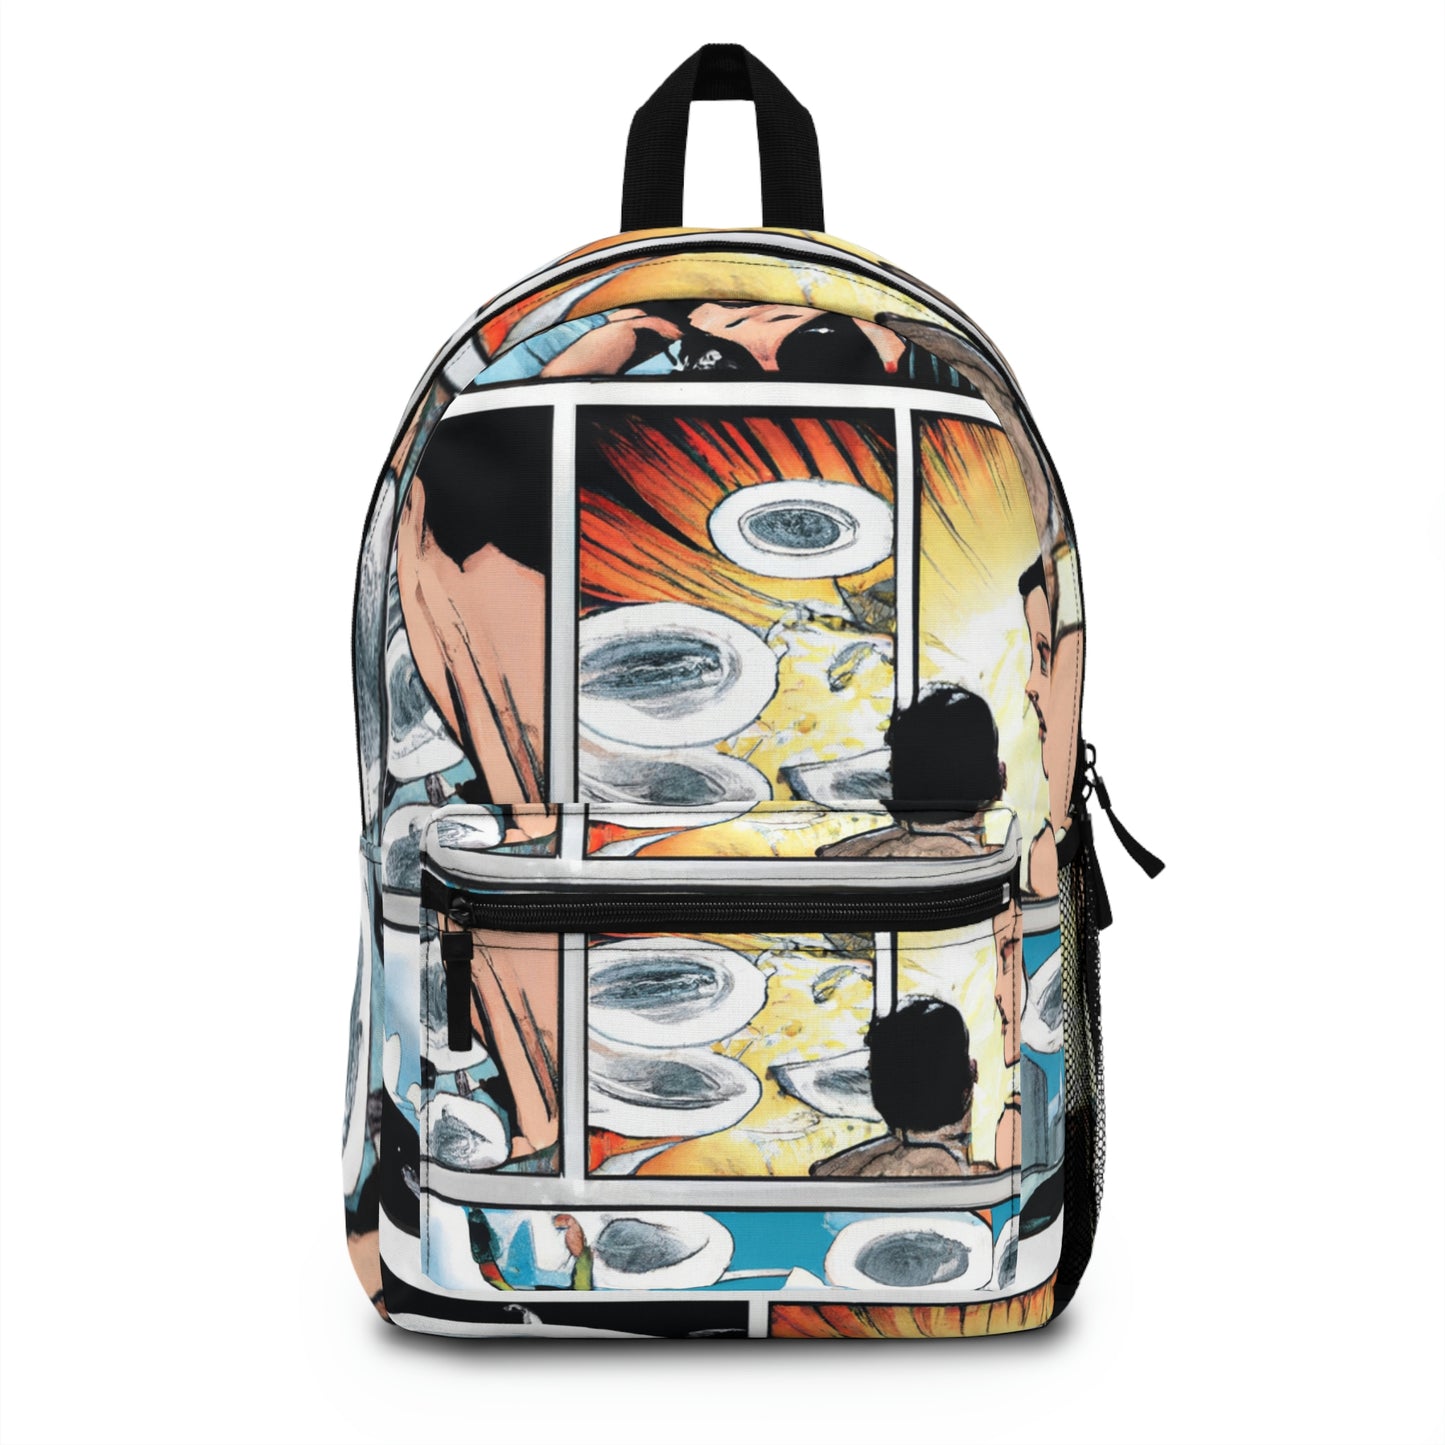 Cyberstorme the Techno-Wizard - Comic Book Backpack